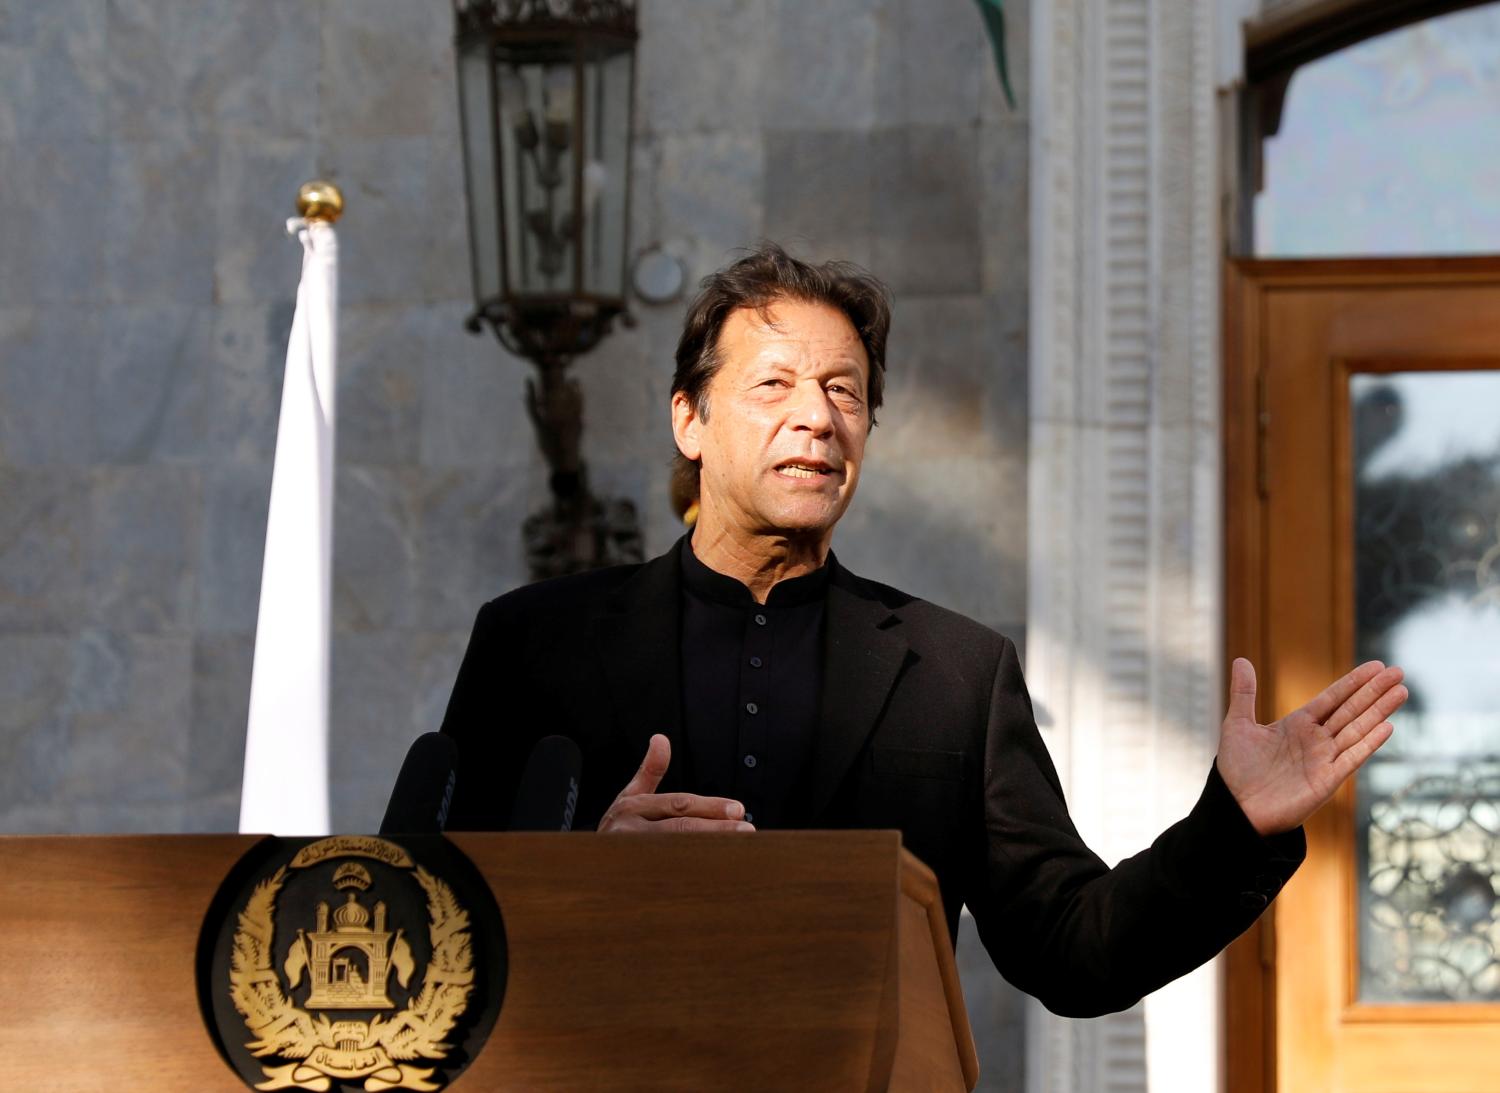 Pakistan's Prime Minister Imran Khan speaks during a joint news conference with Afghan President Ashraf Ghani (not pictured) at the presidential palace in Kabul, Afghanistan November 19, 2020. REUTERS/Mohammad Ismail